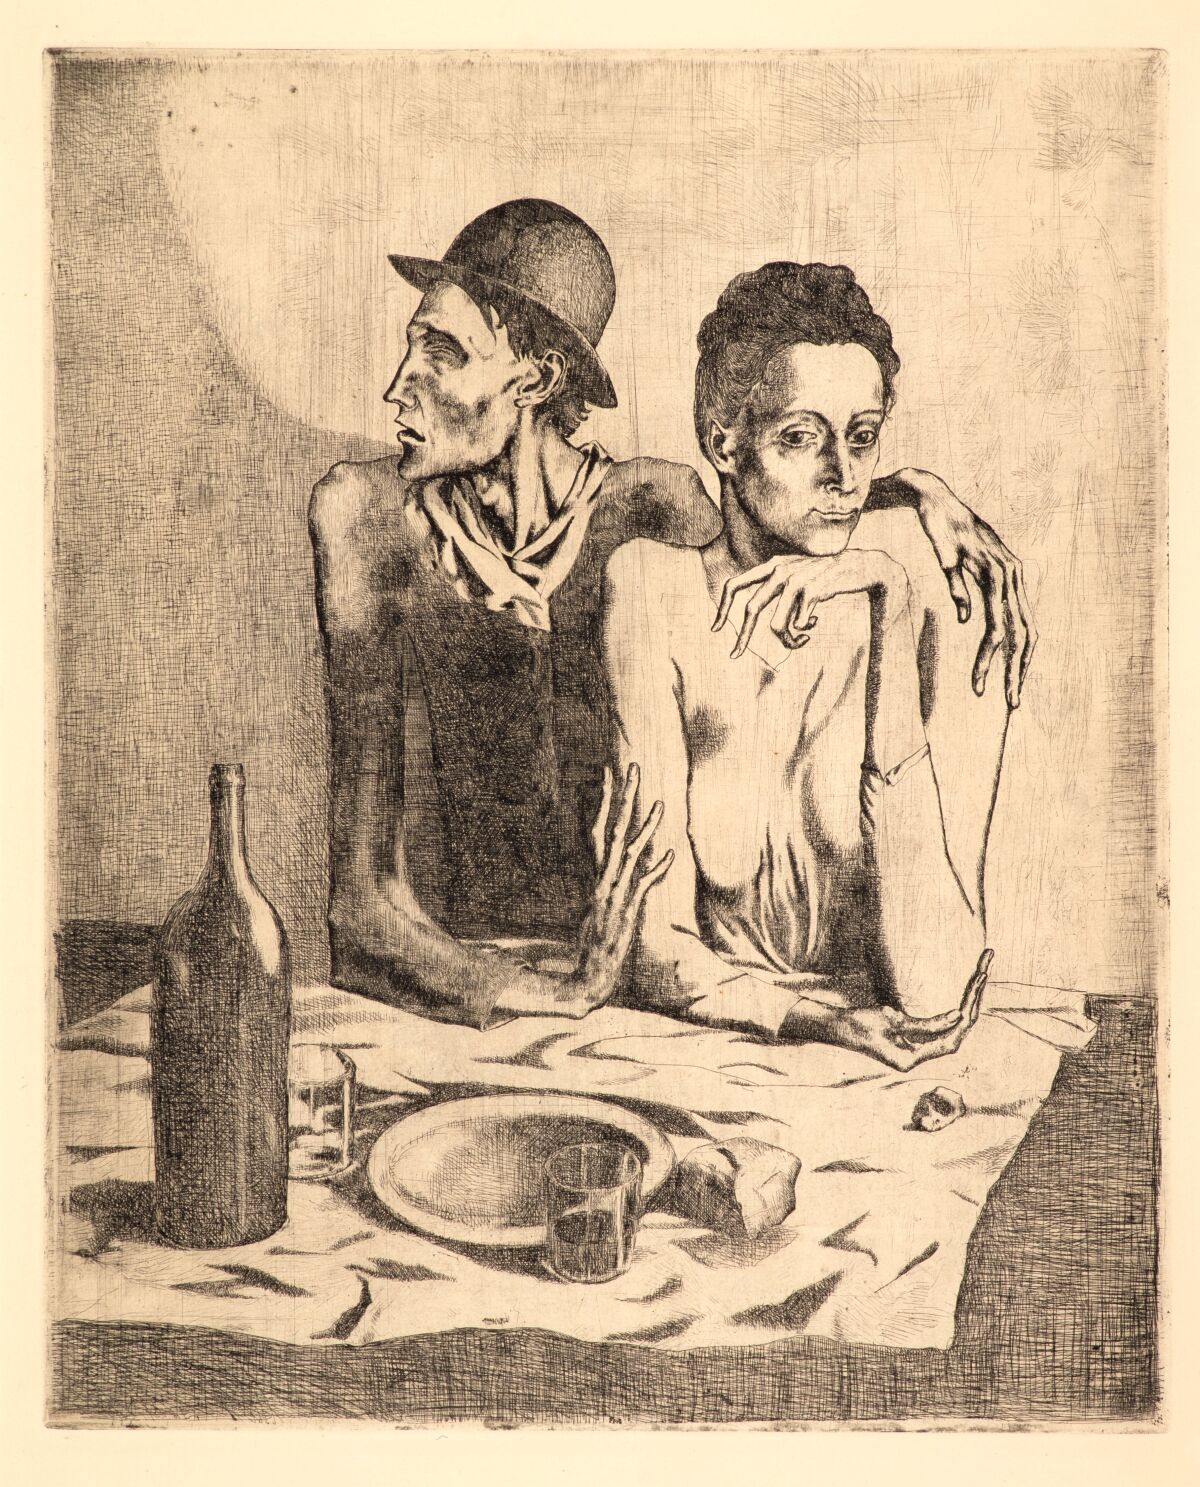 "The Frugal Repast" by Pablo Picasso (Etching, 1904). Museum purchase with funds provided by Mrs. Irving T. Snyder.